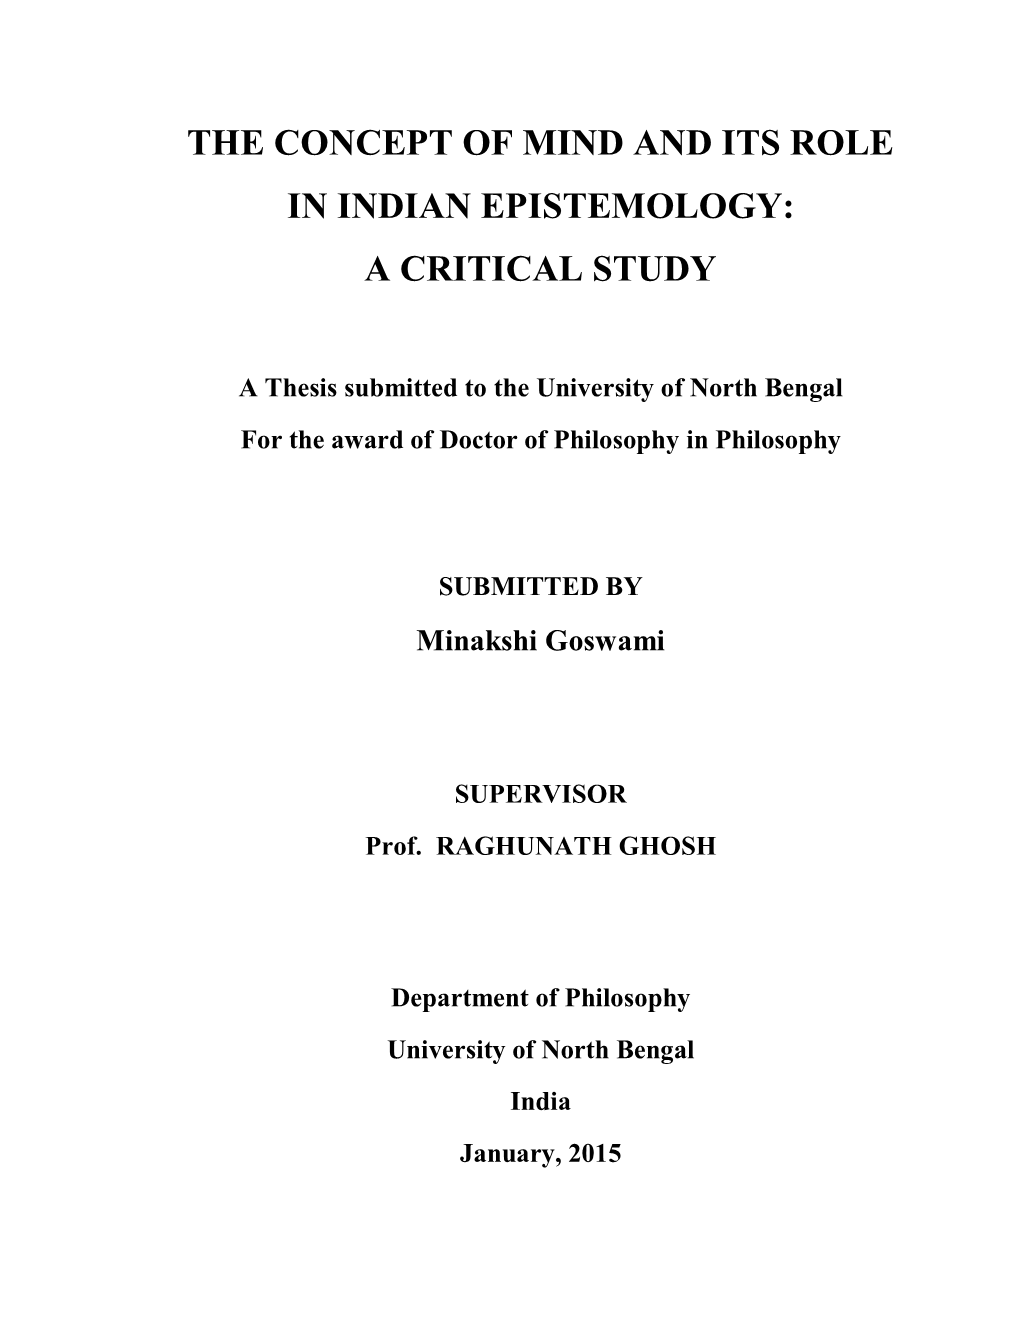 The Concept of Mind and Its Role in Indian Epistemology: a Critical Study